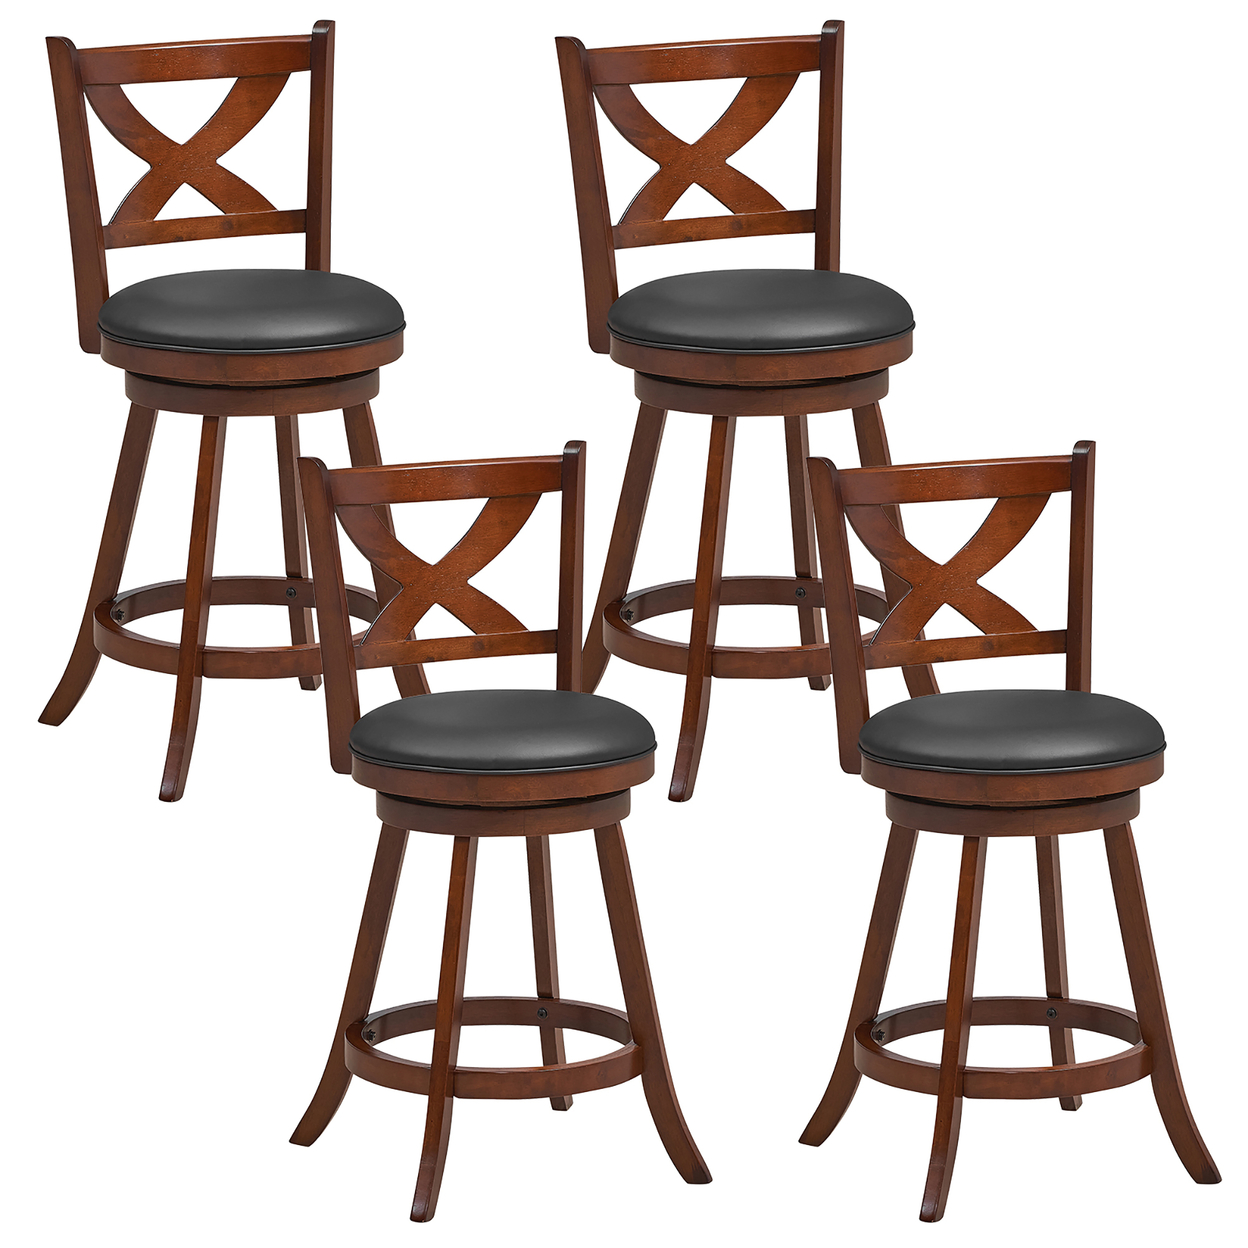 Swivel Bar Stools Set Of 4 24 Inch Counter Height Bar Chairs W/ High Backrest